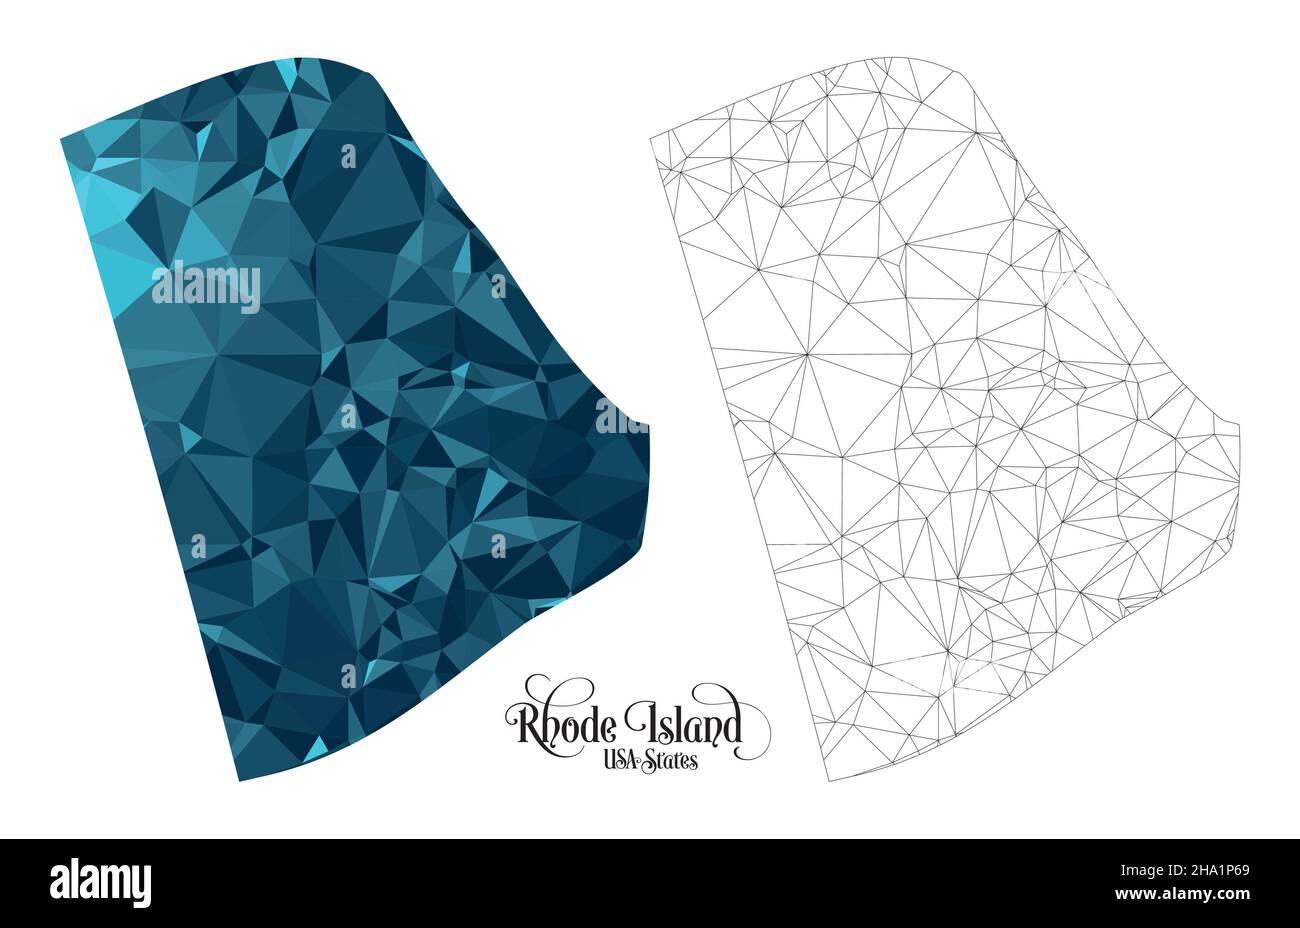 Low Poly Map of Rhode Island State (USA). Polygonal Shape Vector Illustration on White Background. States of America Territory. Stock Vector